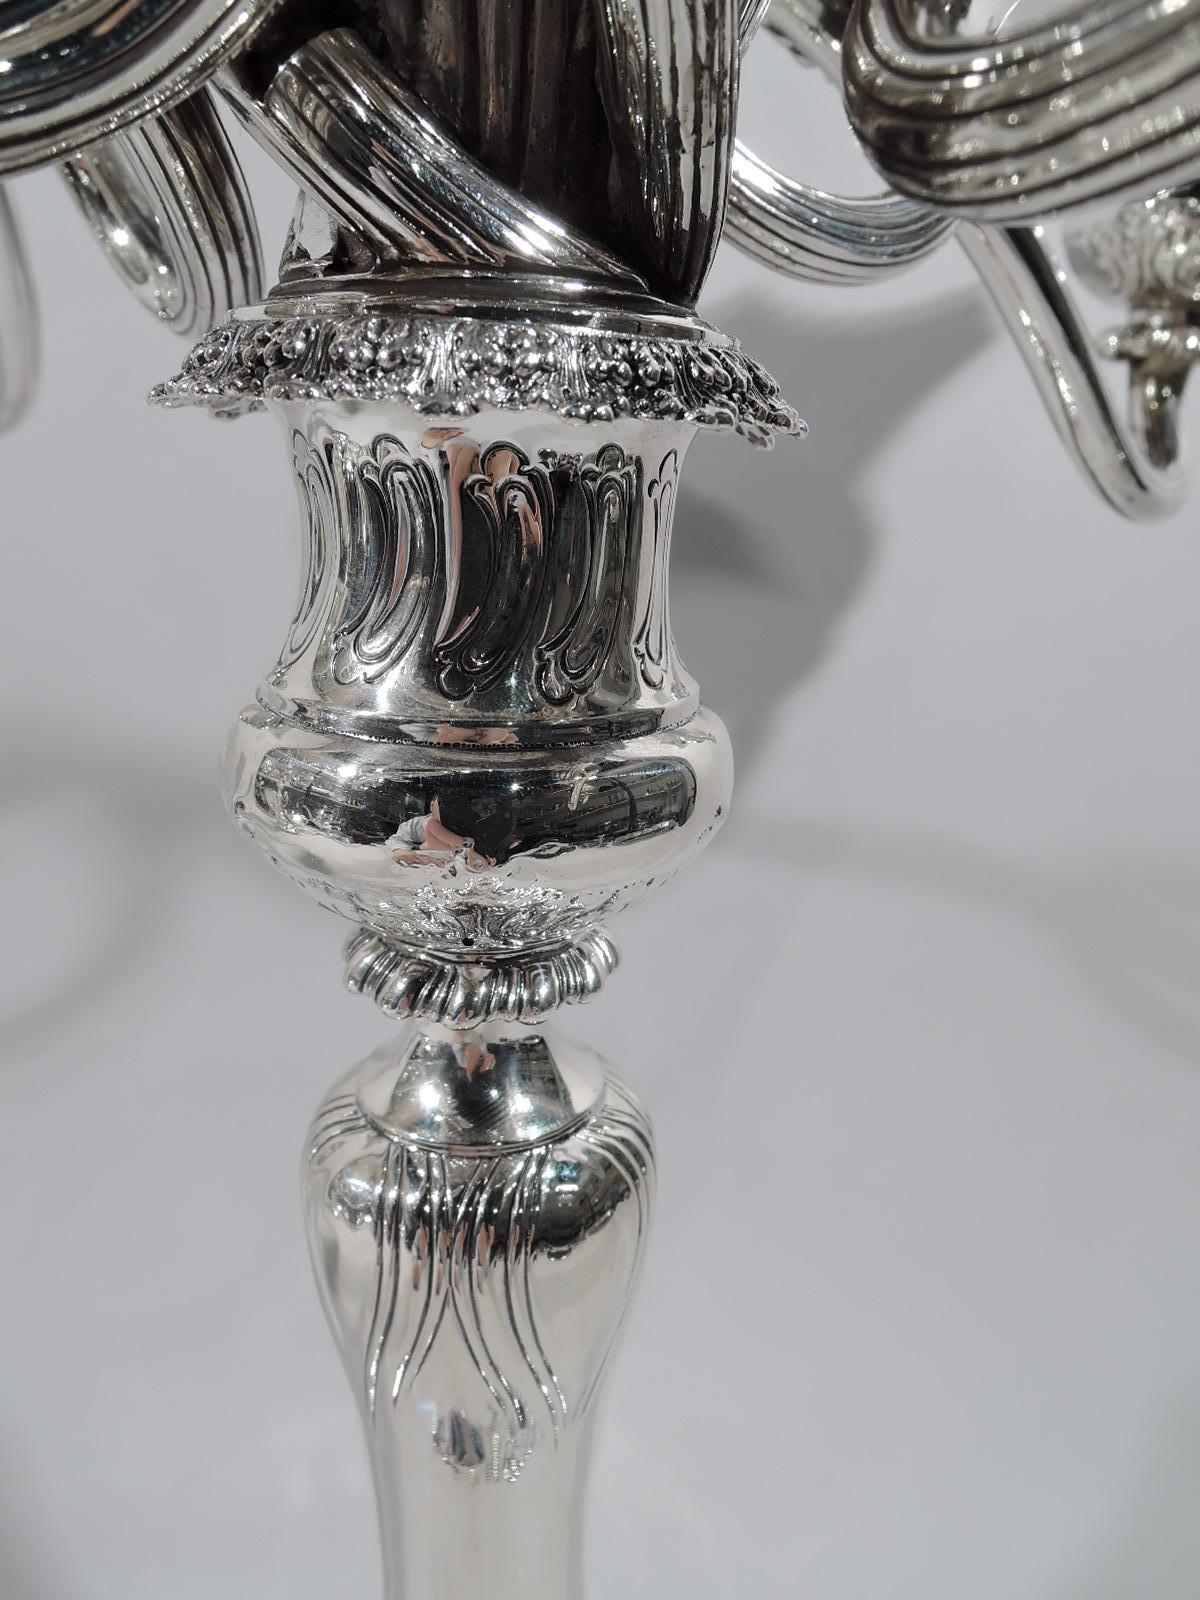 19th Century Pair of Tiffany Turn-of-the-Century Sterling Silver 5-Light Candelabra